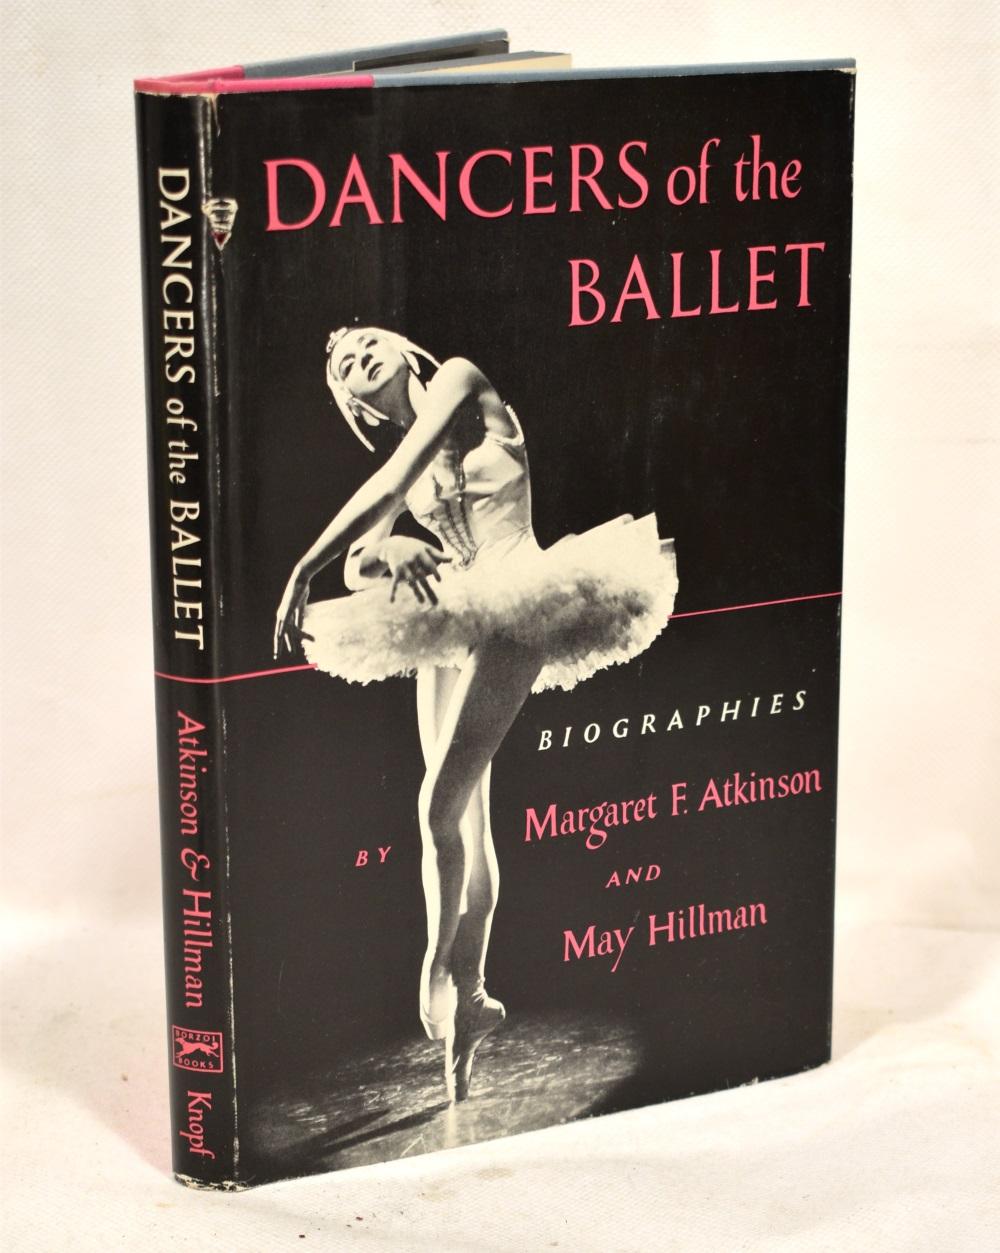 biography books on male ballet dancers